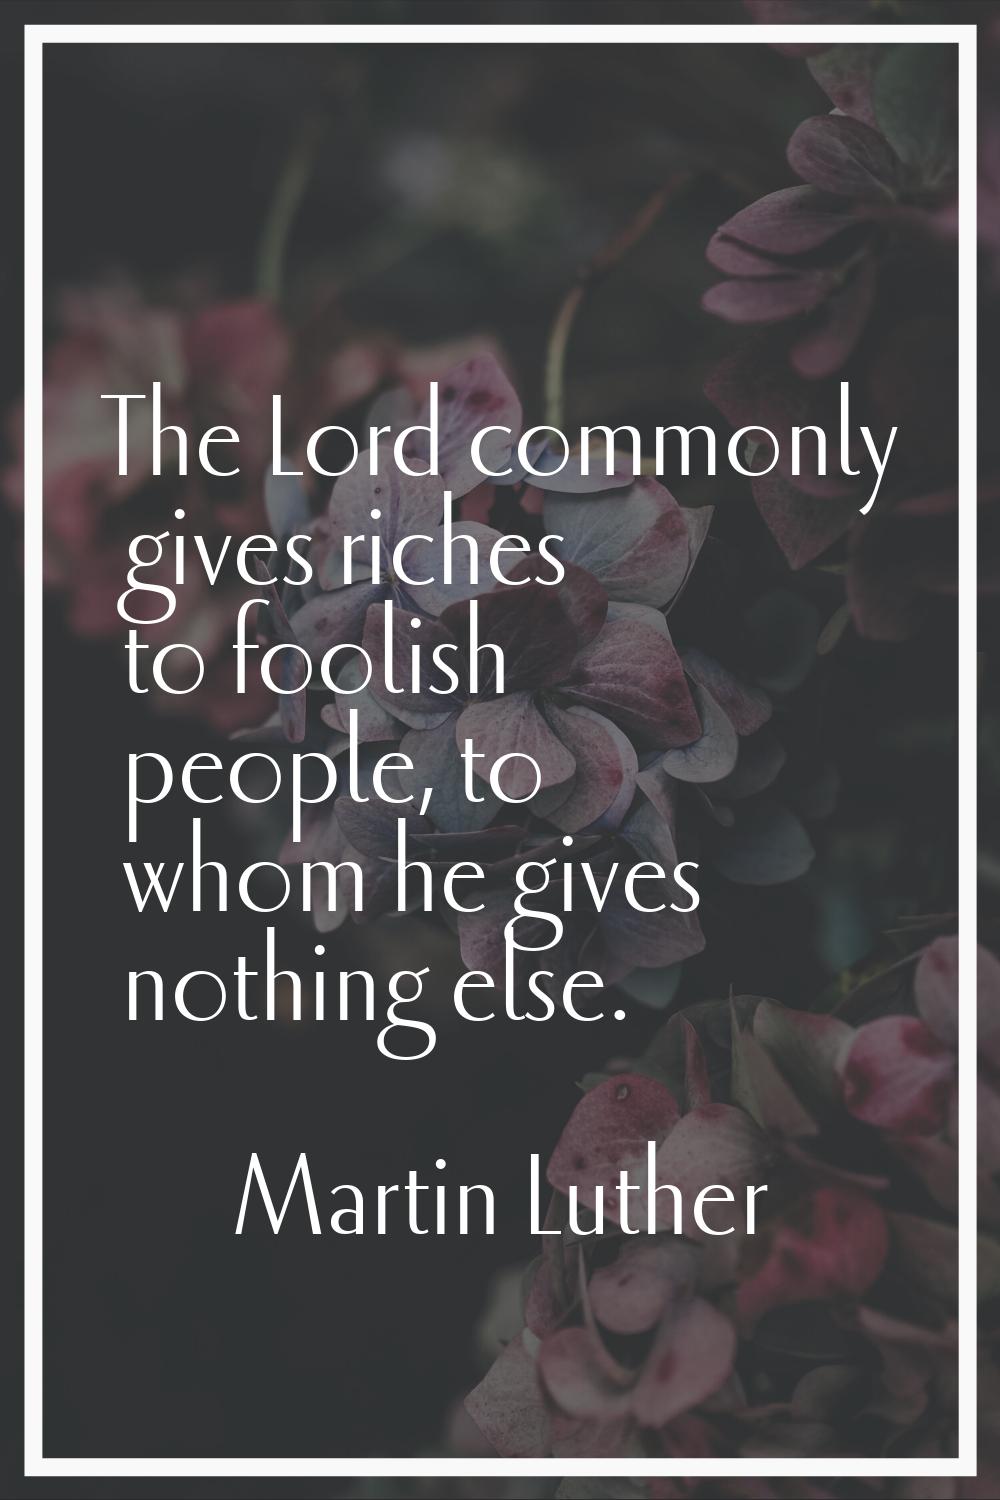 The Lord commonly gives riches to foolish people, to whom he gives nothing else.